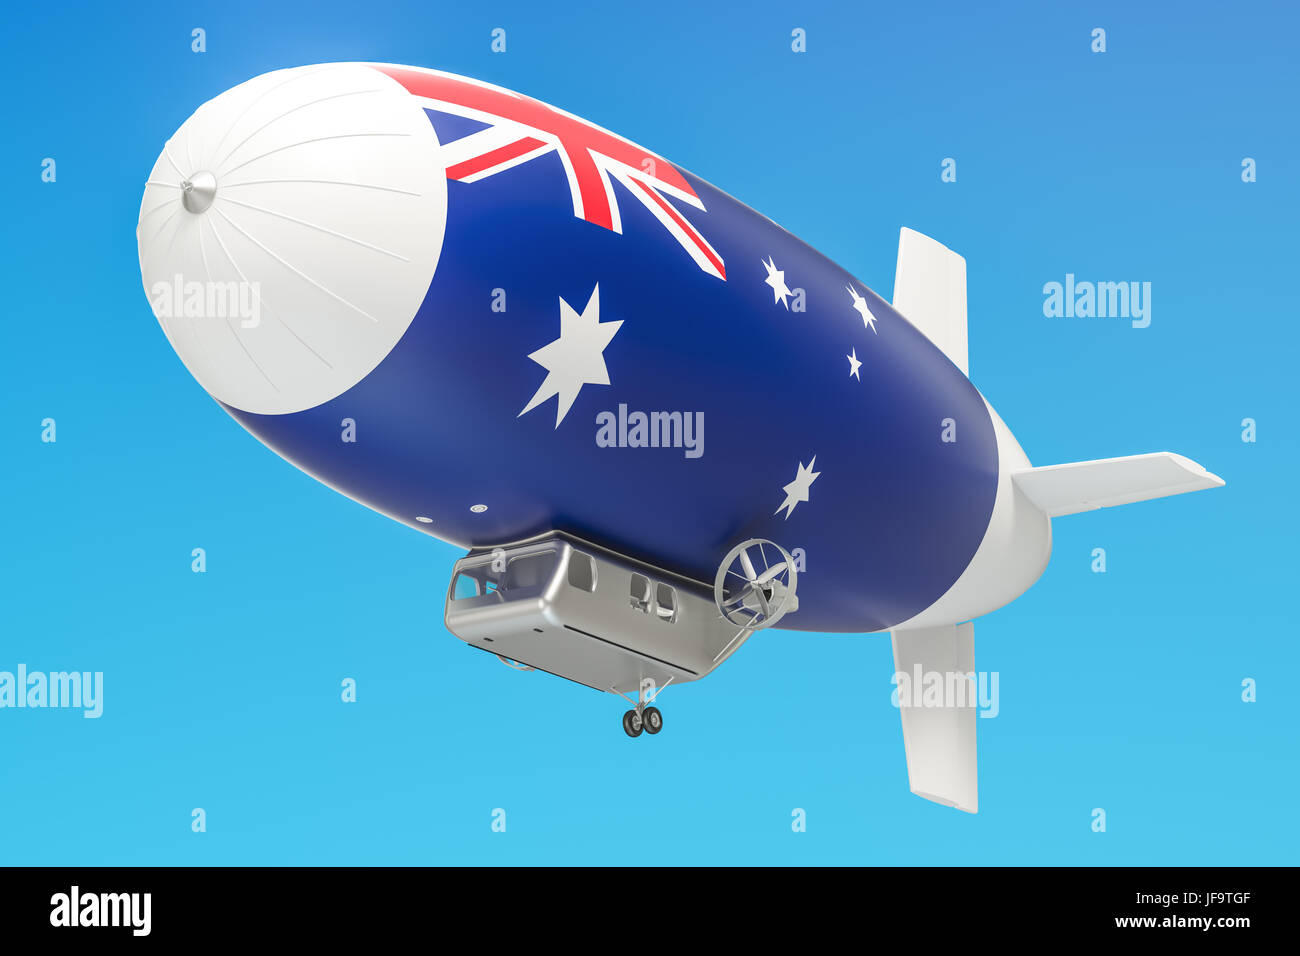 Airship or dirigible balloon with Australian flag, 3D rendering isolated on white background Stock Photo